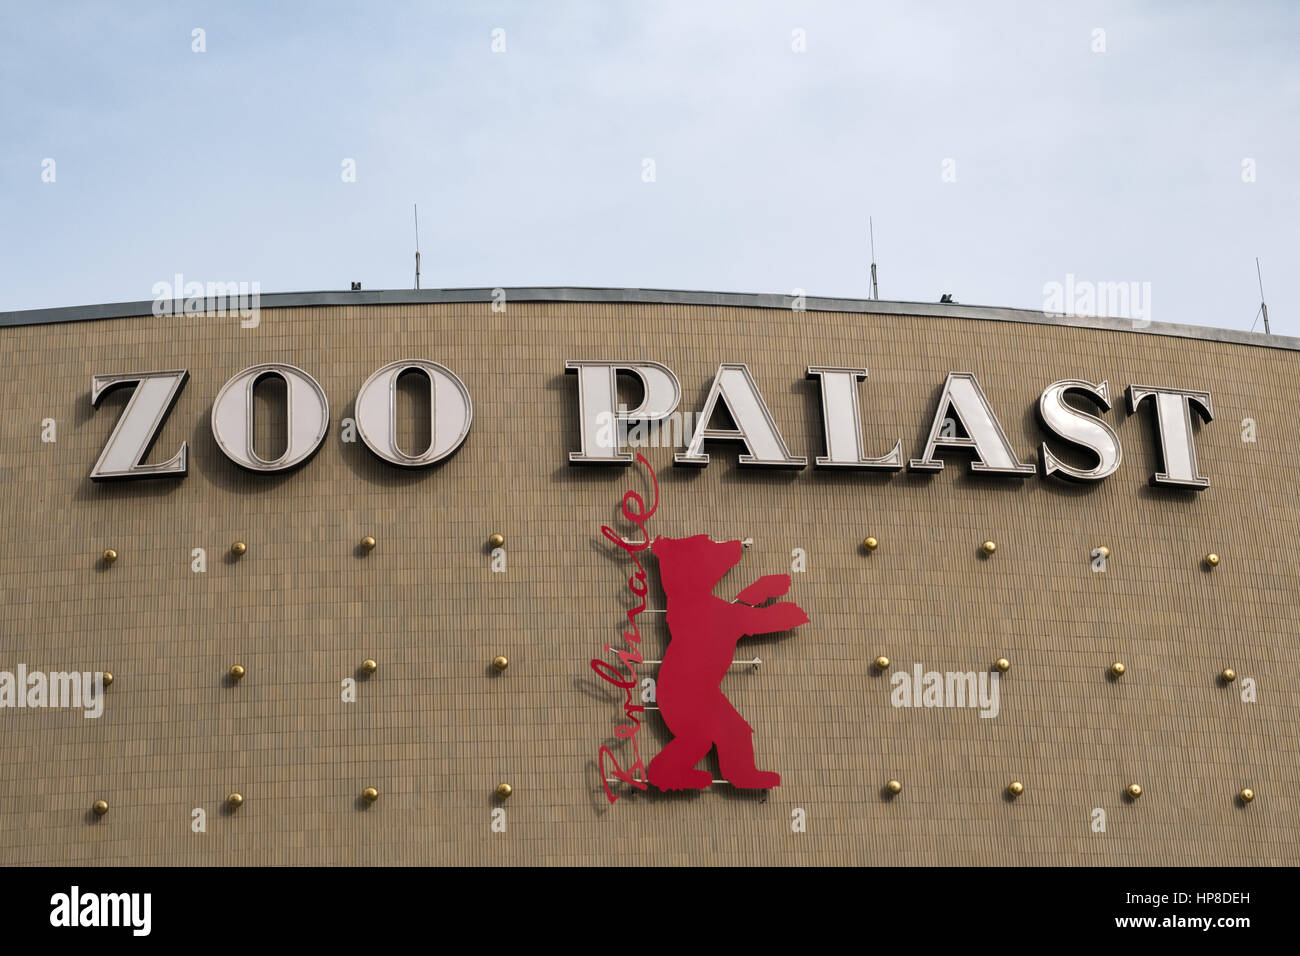 Berlin, Germany - February 19, 2017: The logo of the Berlinale (Berlin International Film Festival) on the facade of the Zoo Palast cinema. Stock Photo